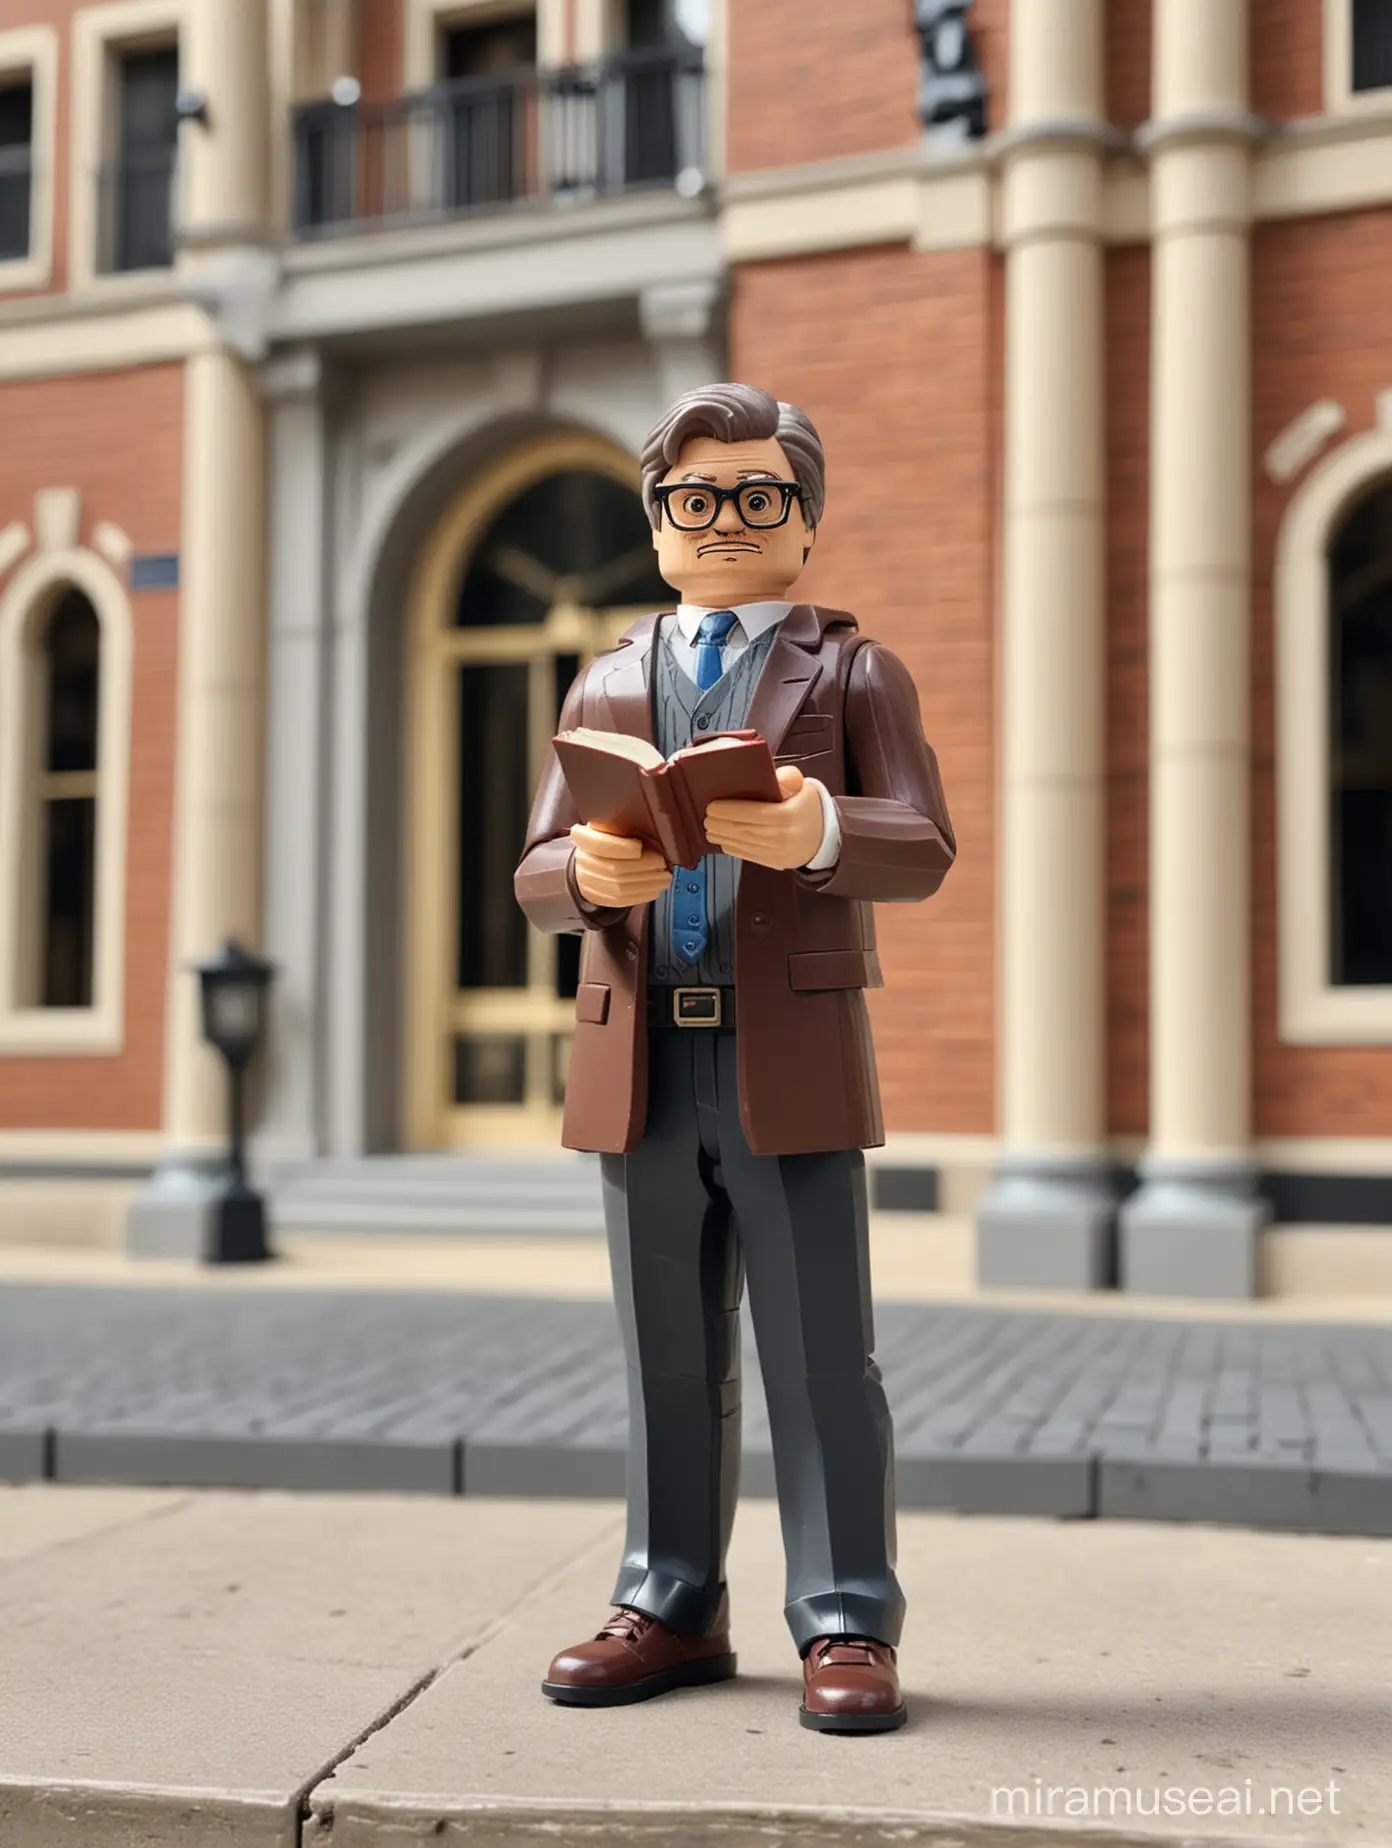 LEGO Lawyer with Scale and Book in Courthouse Setting